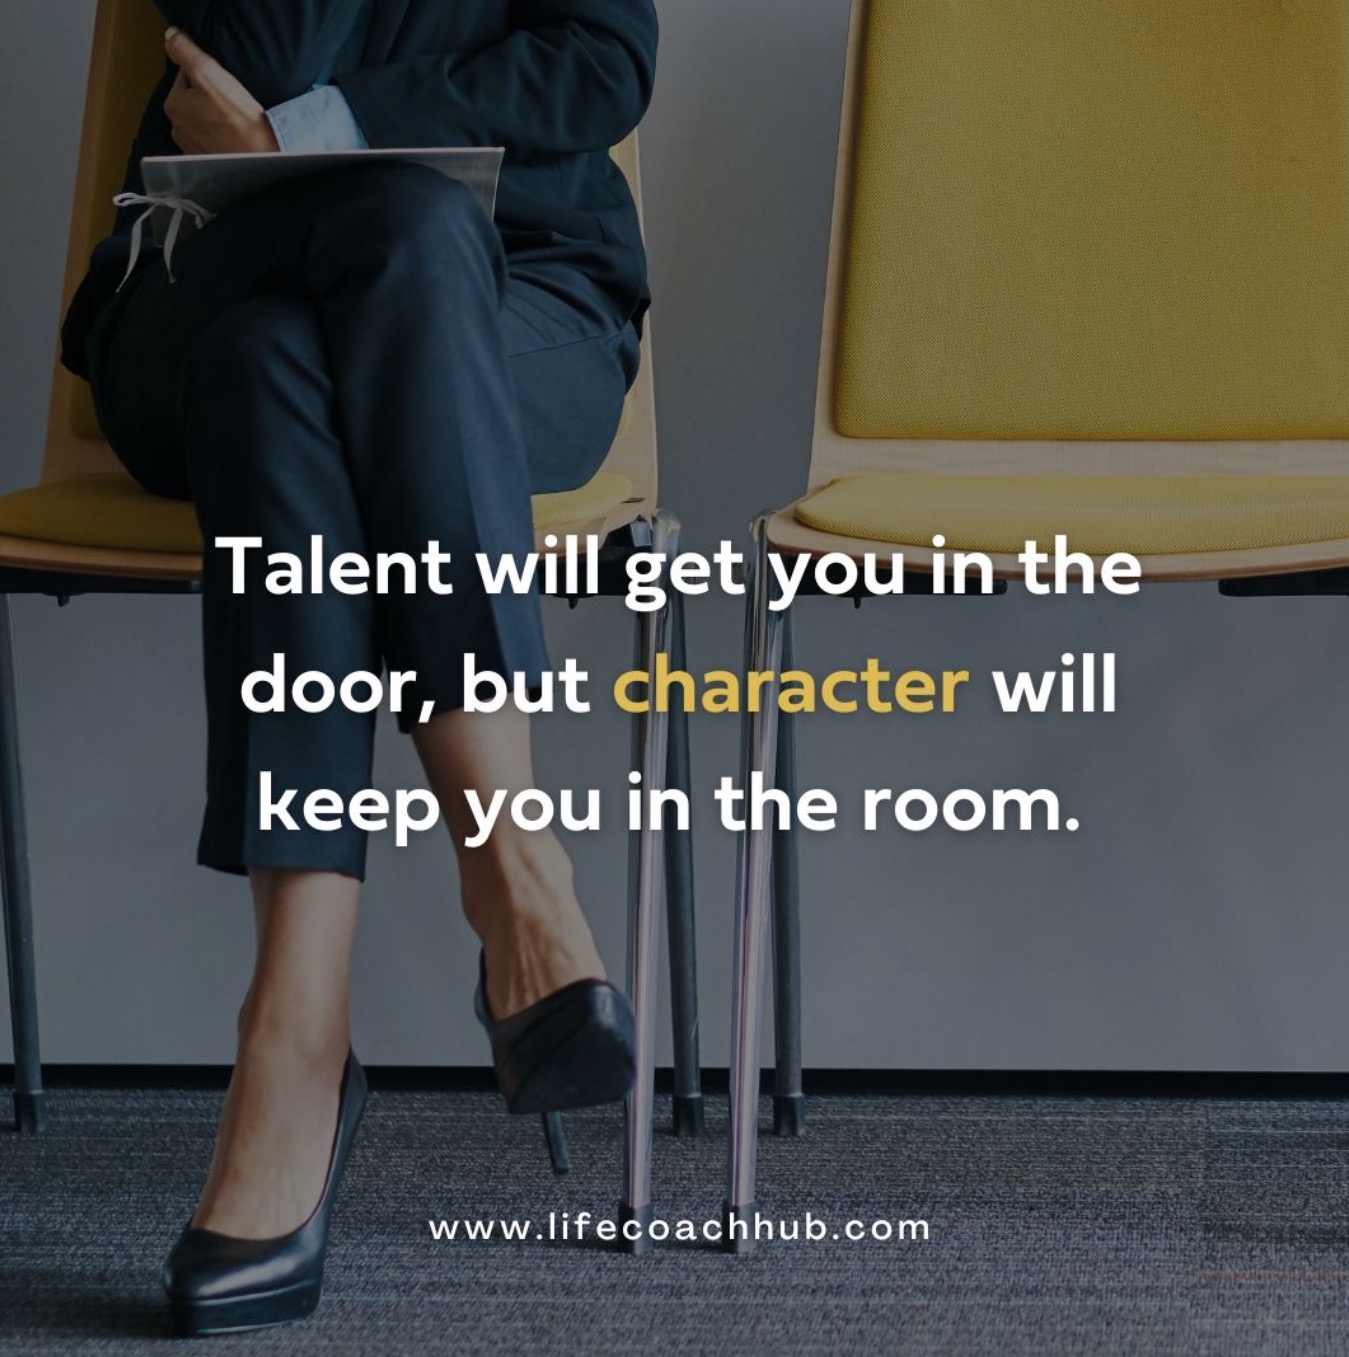 Talent will get you in the door, but character will keep you in the room.